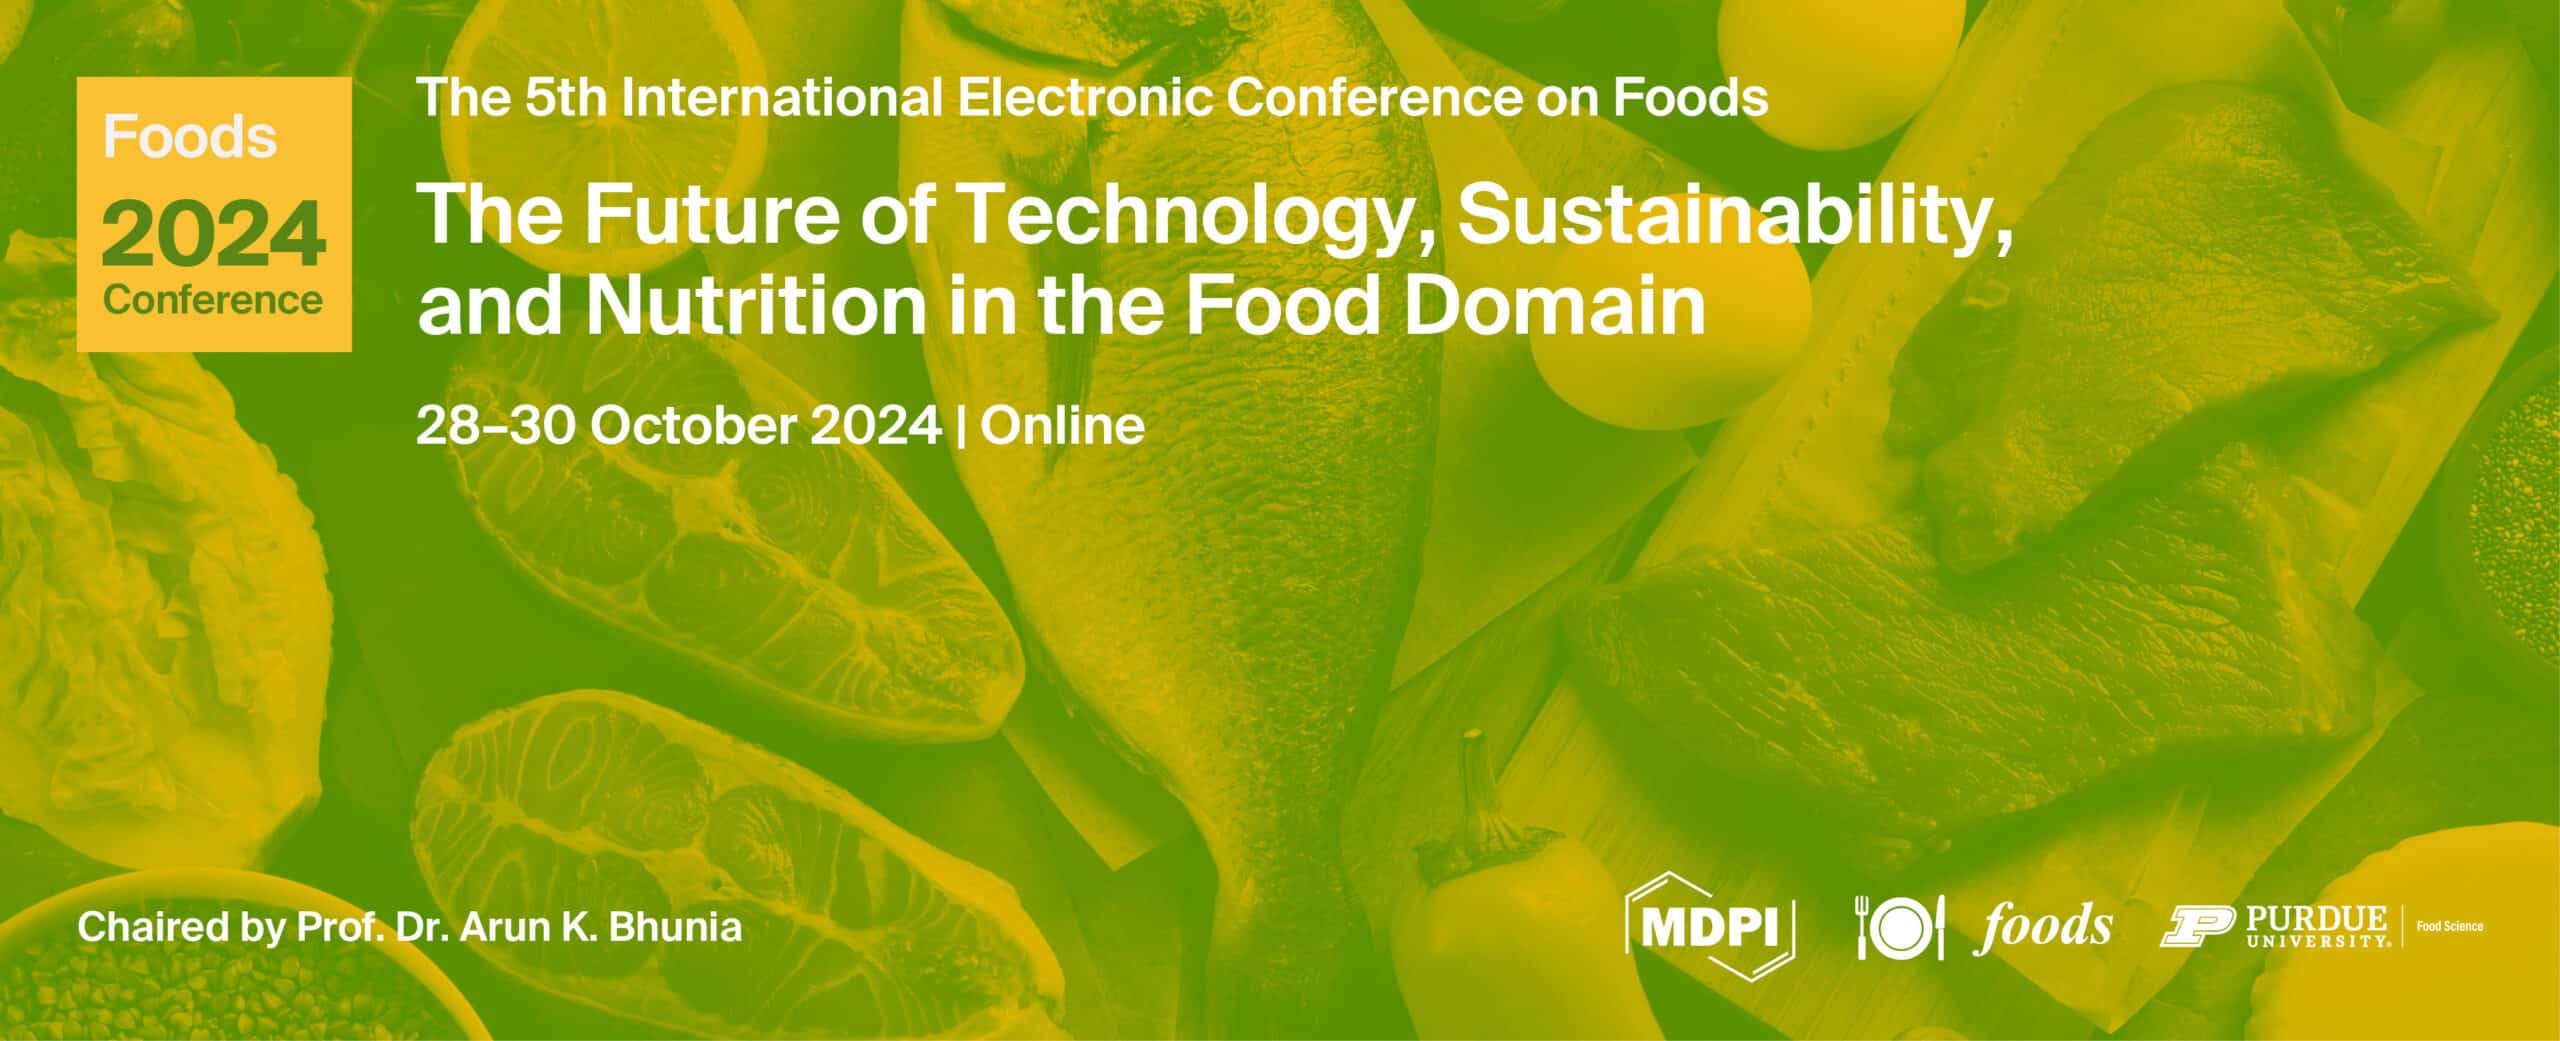 The 5th International Electronic Conference on Foods —The Future of Technology, Sustainability, and Nutrition in the Food Domain